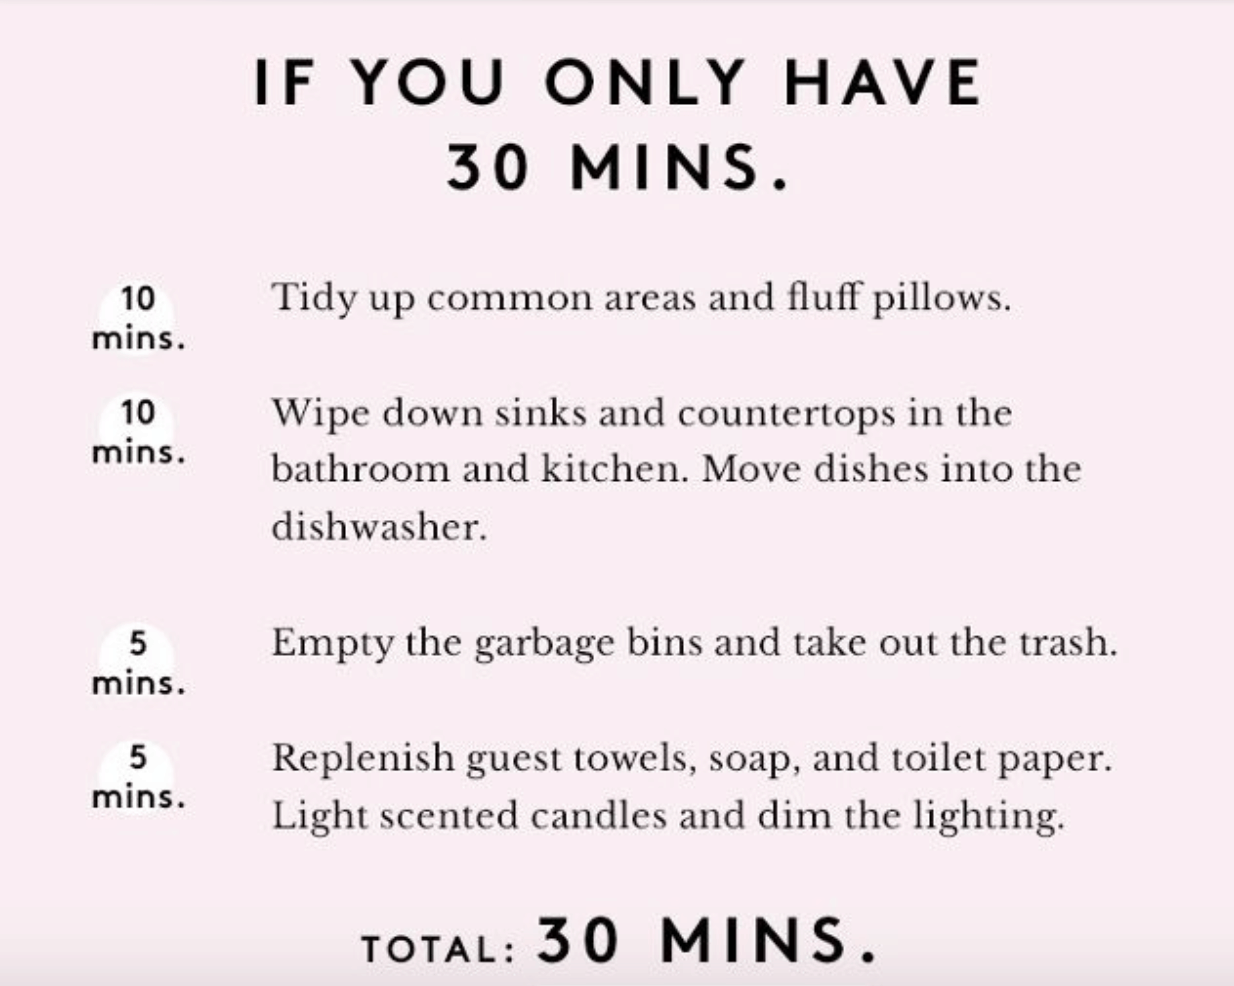 Clean home in 30 minutes